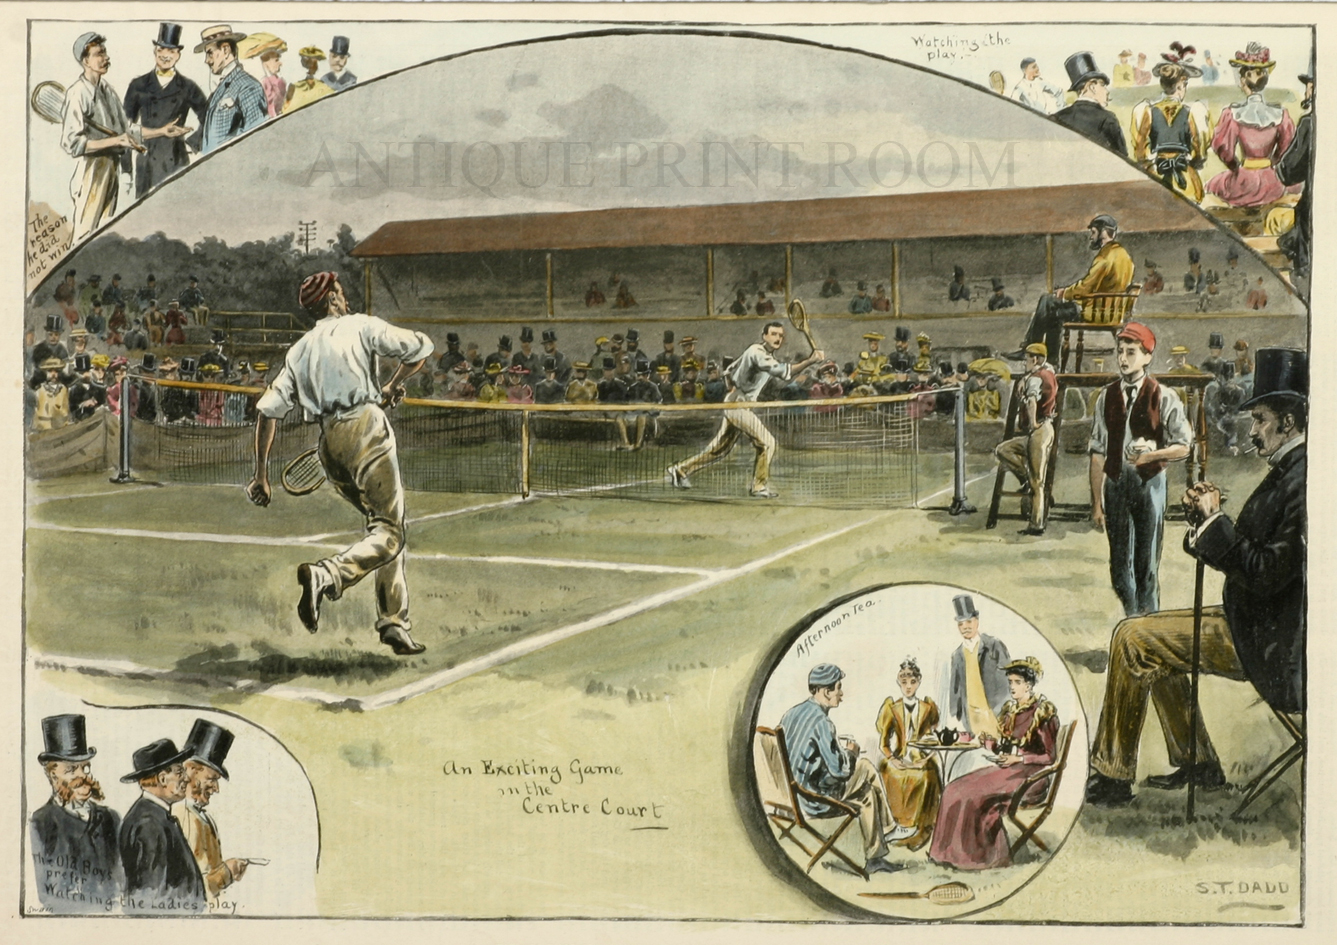 The All England Lawn Tennis Club - Championship Meeting. - Antique Print from 1893